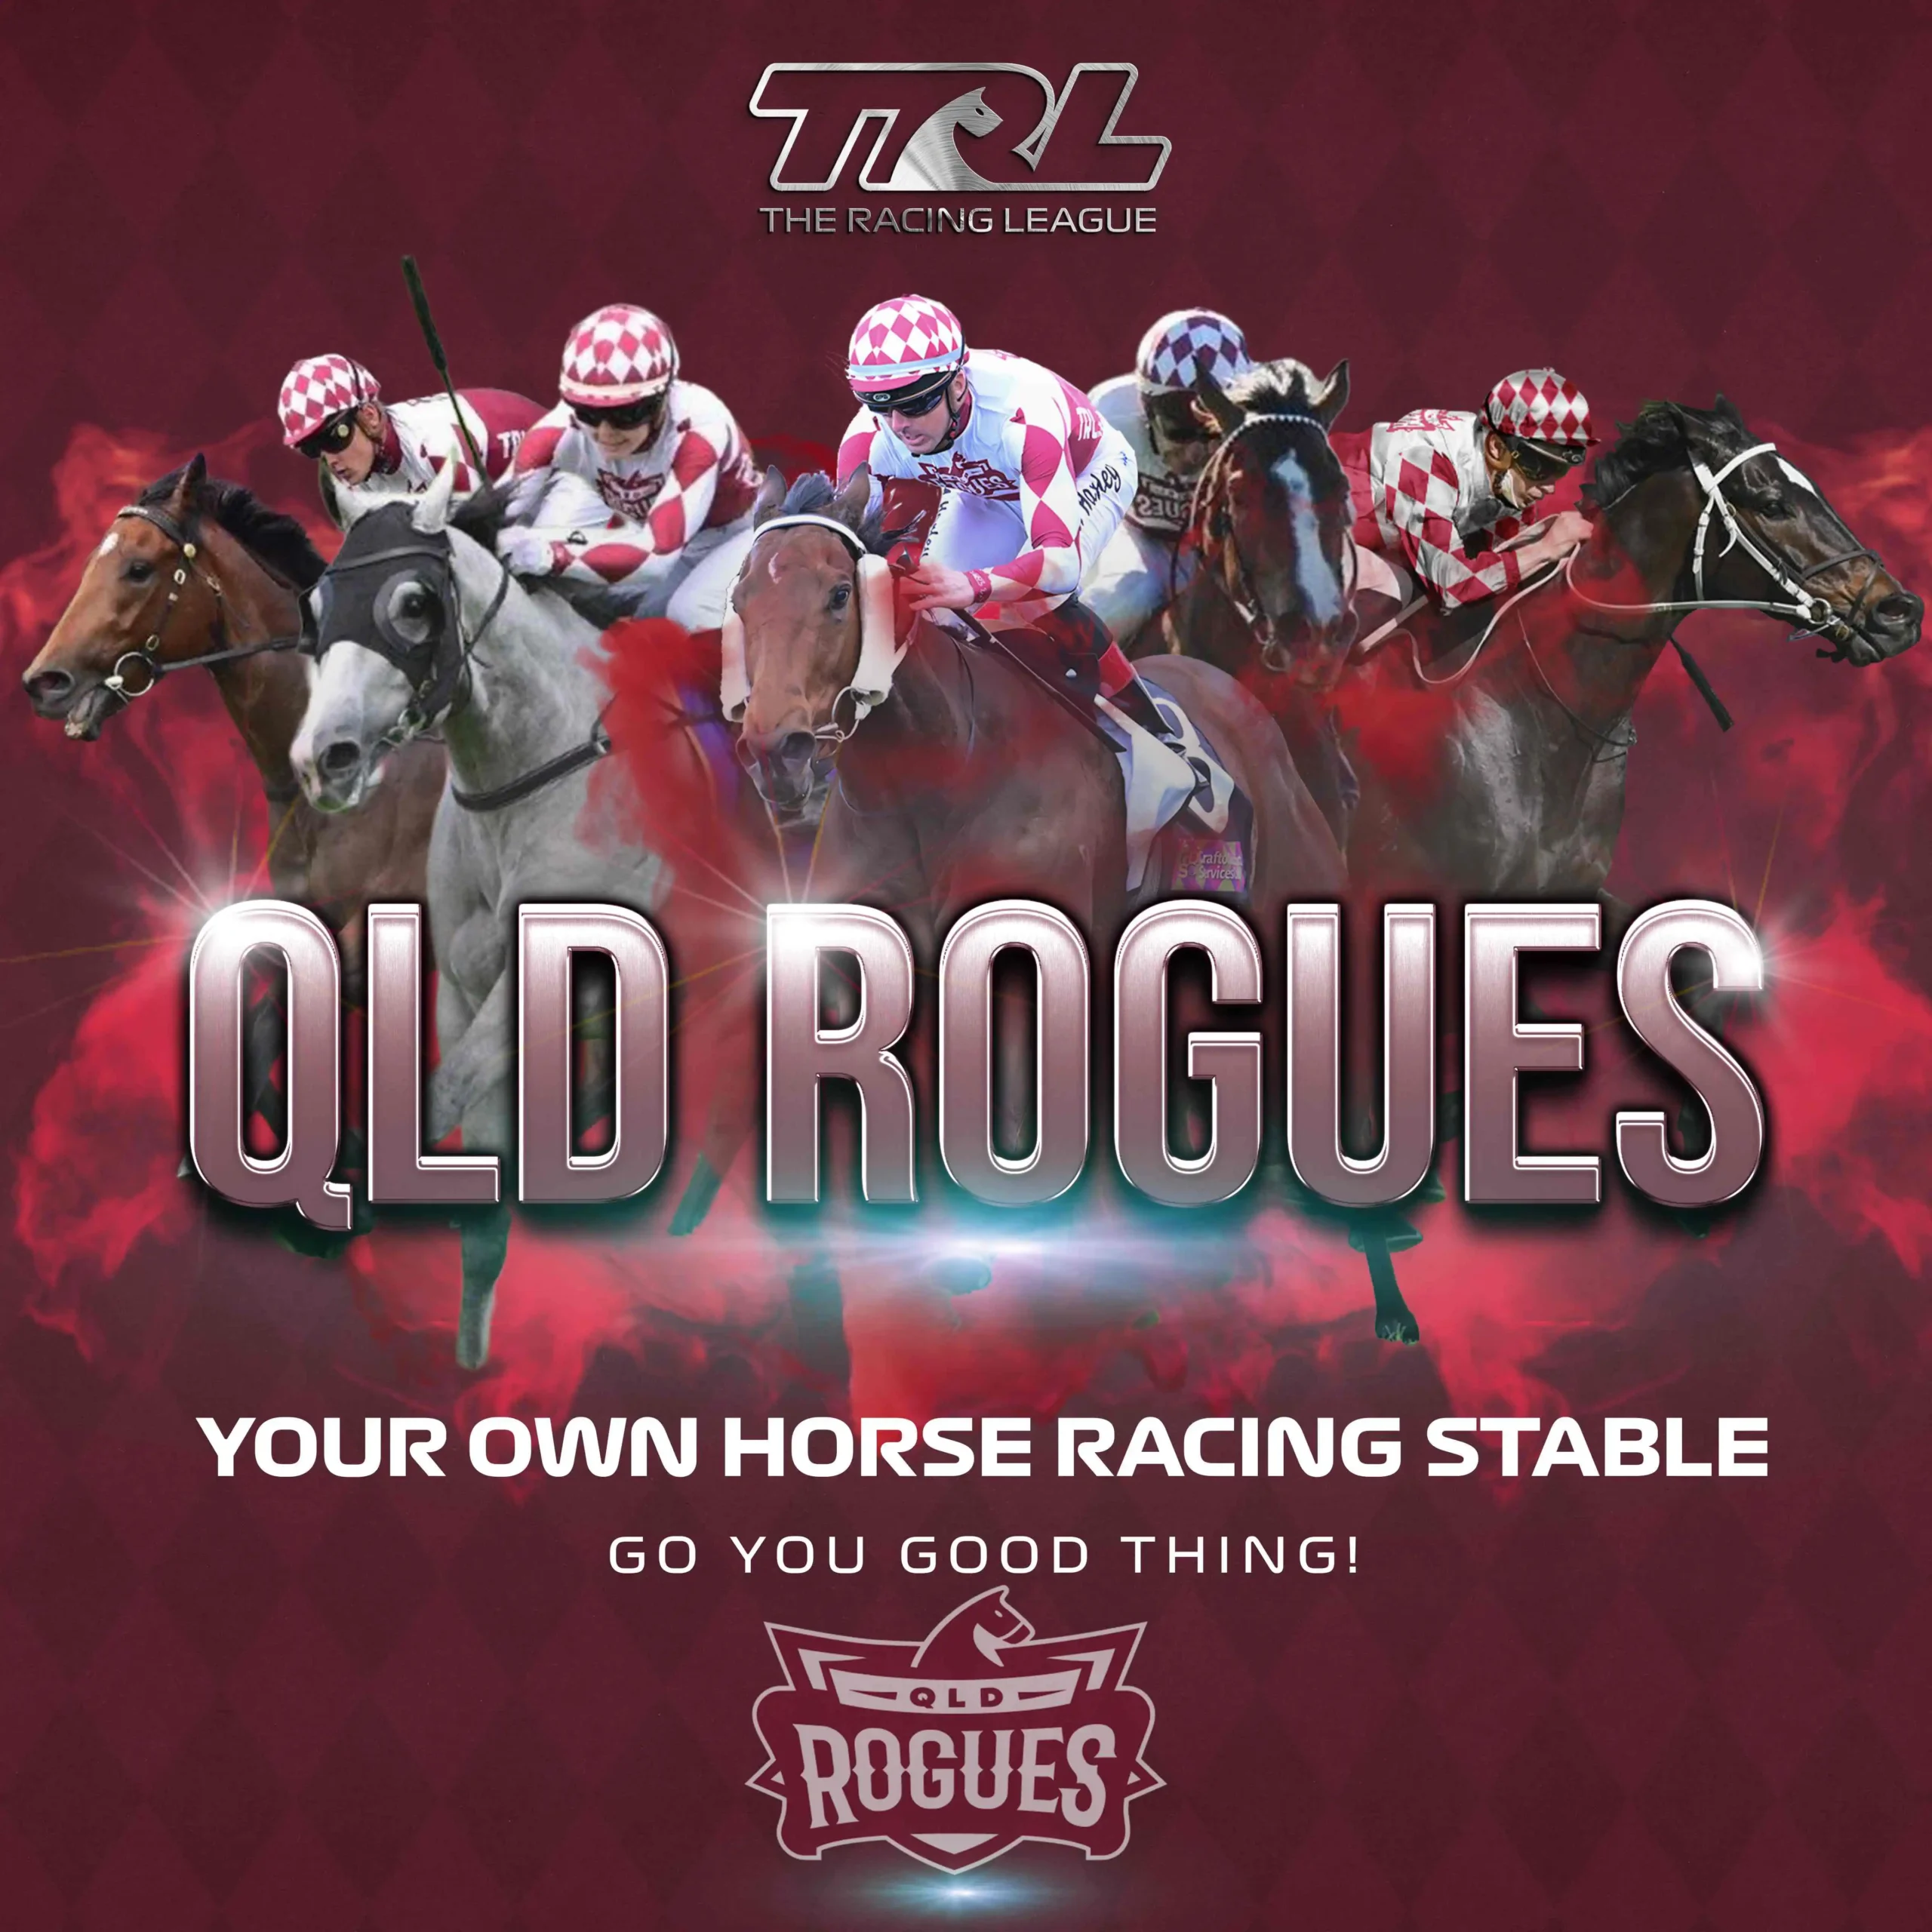 The Racing League QLD Rogues